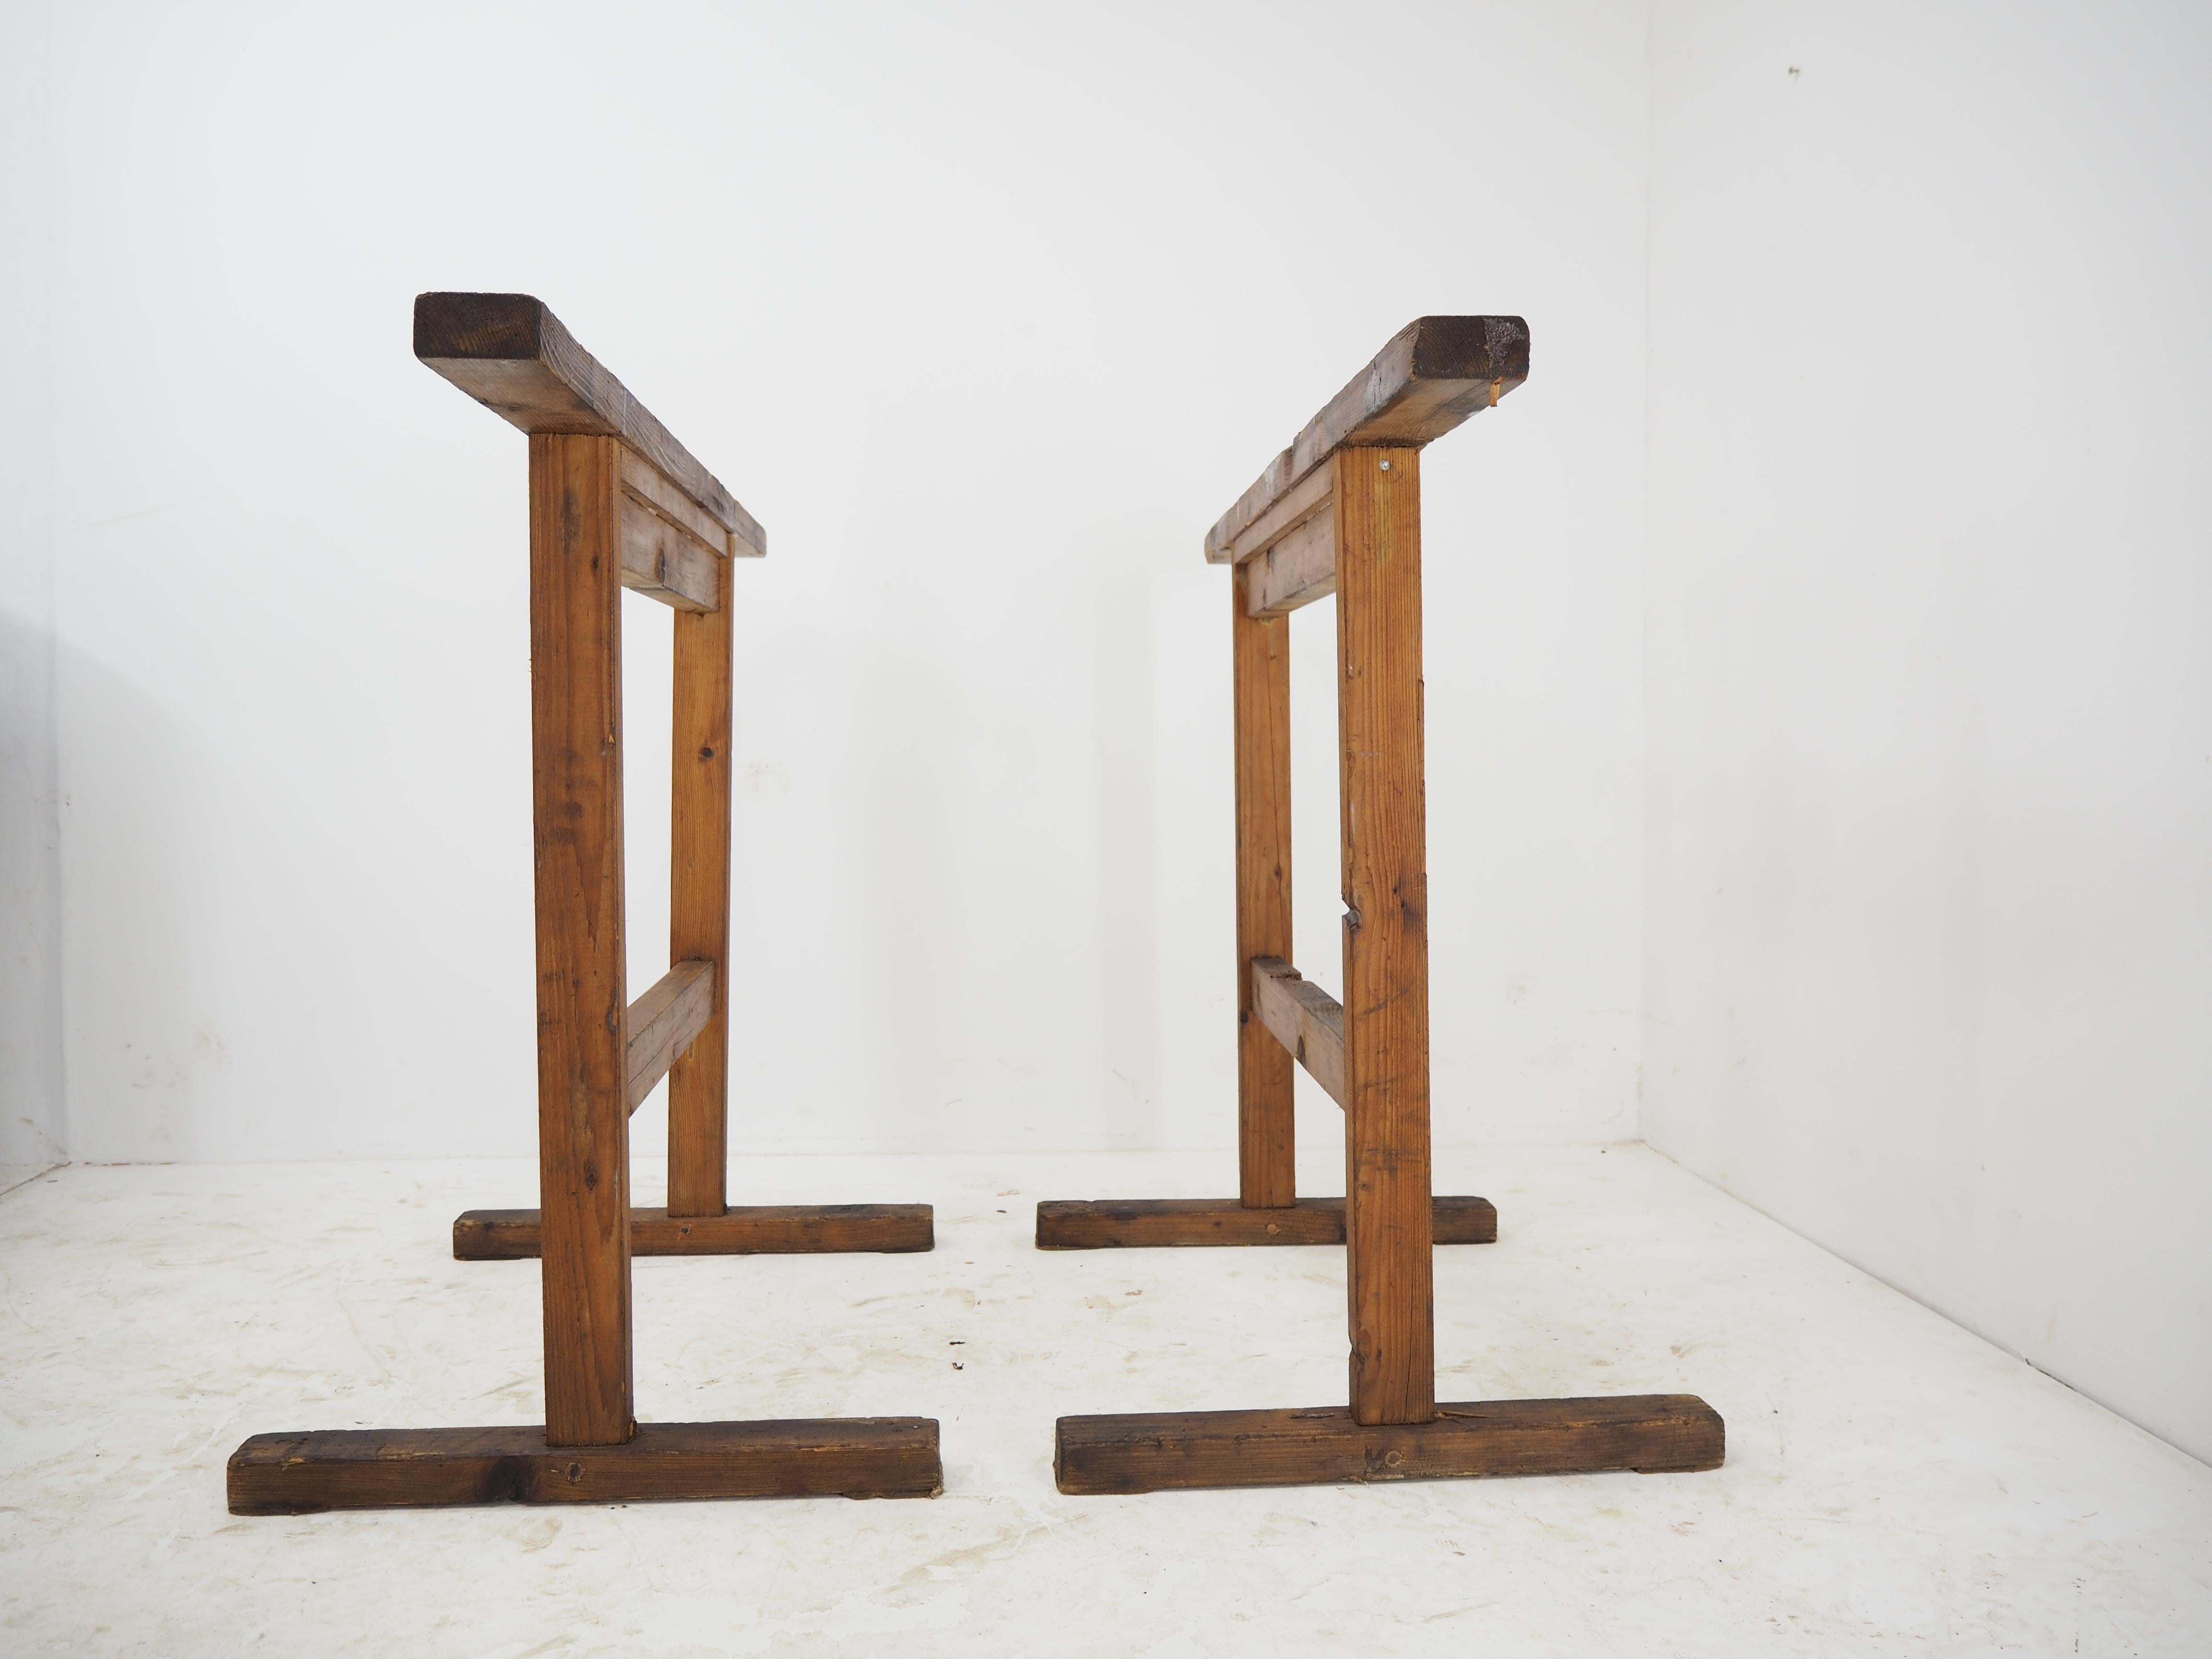 Pair of Industrial Wood Trestle Table Bases, Early 20th Century In Good Condition For Sale In Praha, CZ